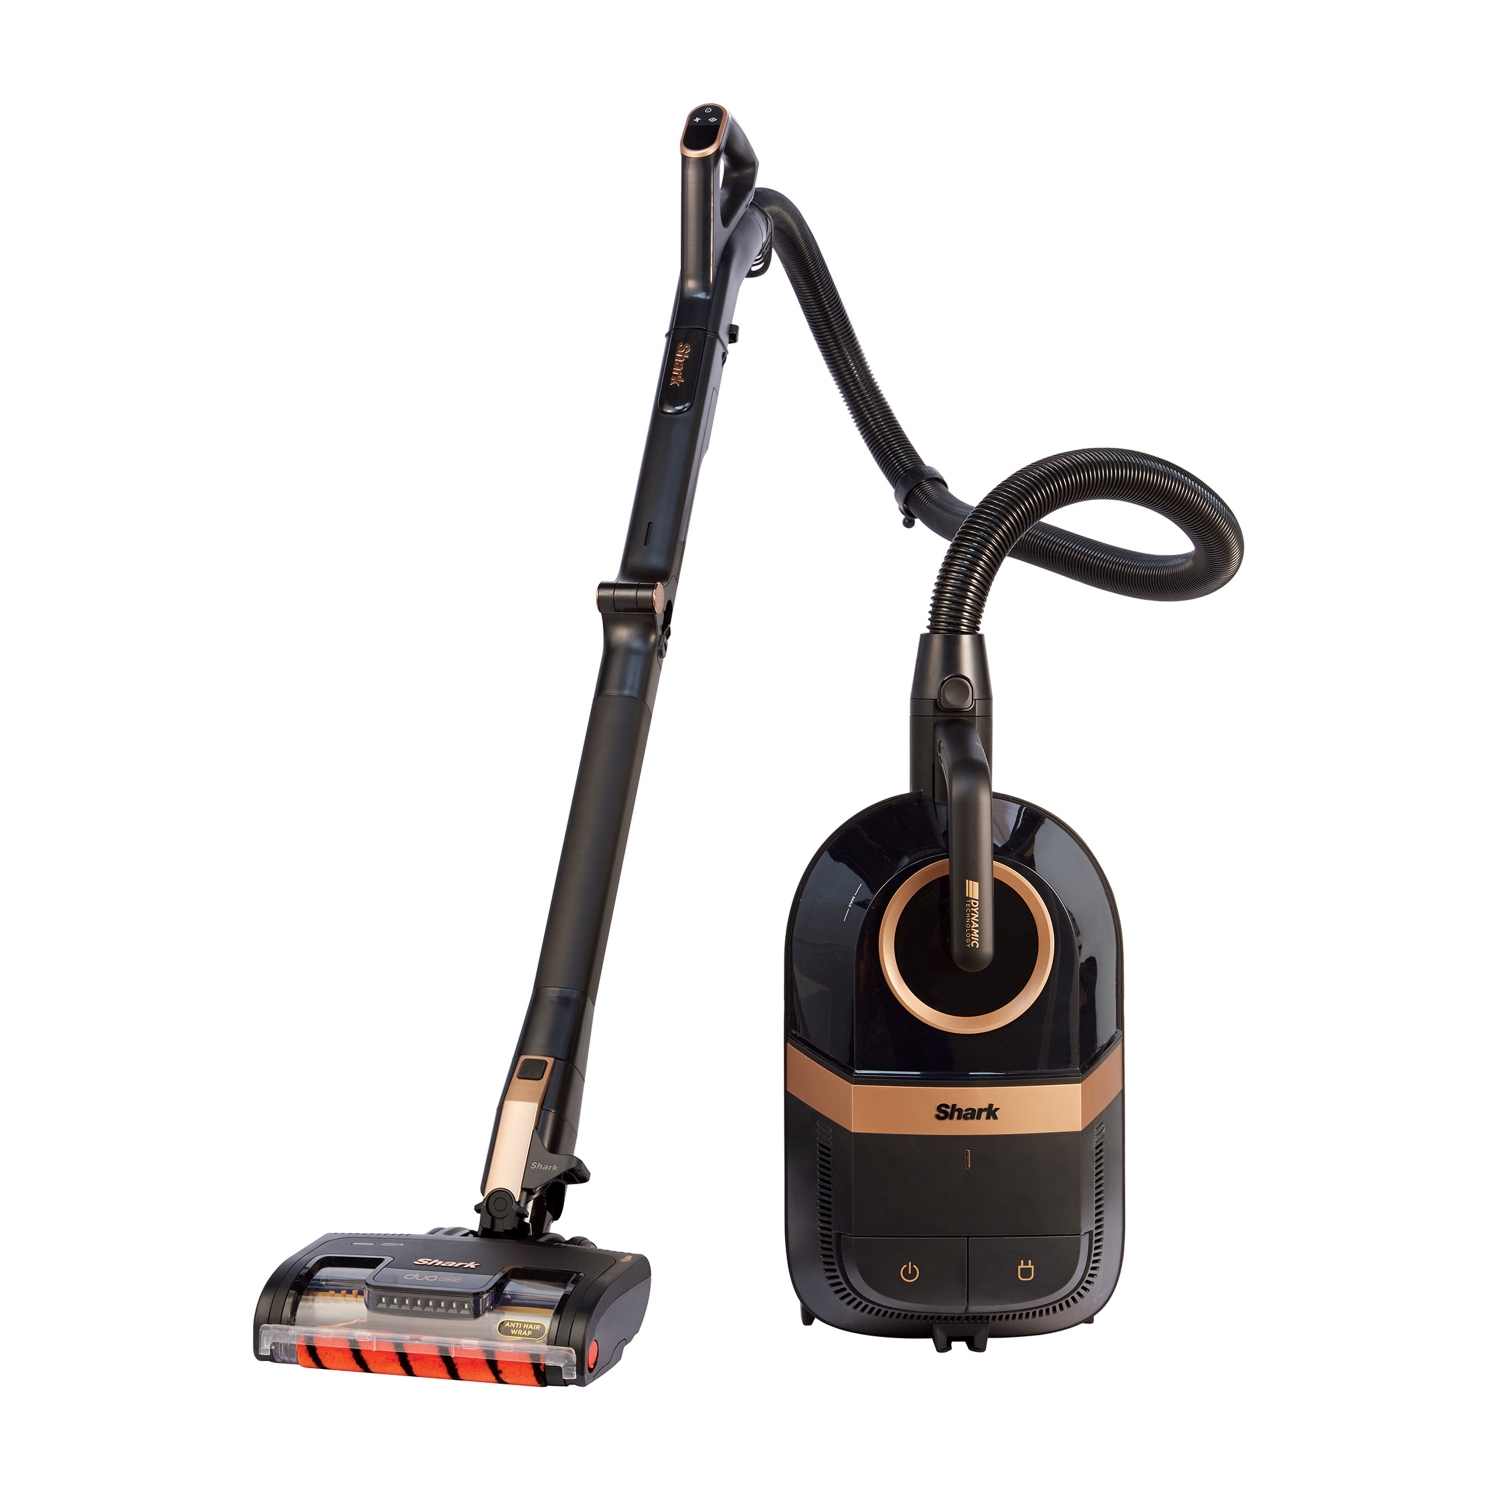 Shark CZ500UKT Bagless Cylinder Vacuum Cleaner with Dynamic Technology, Anti Hair Wrap & DuoClean, Pet Model - Black / Copper - 0